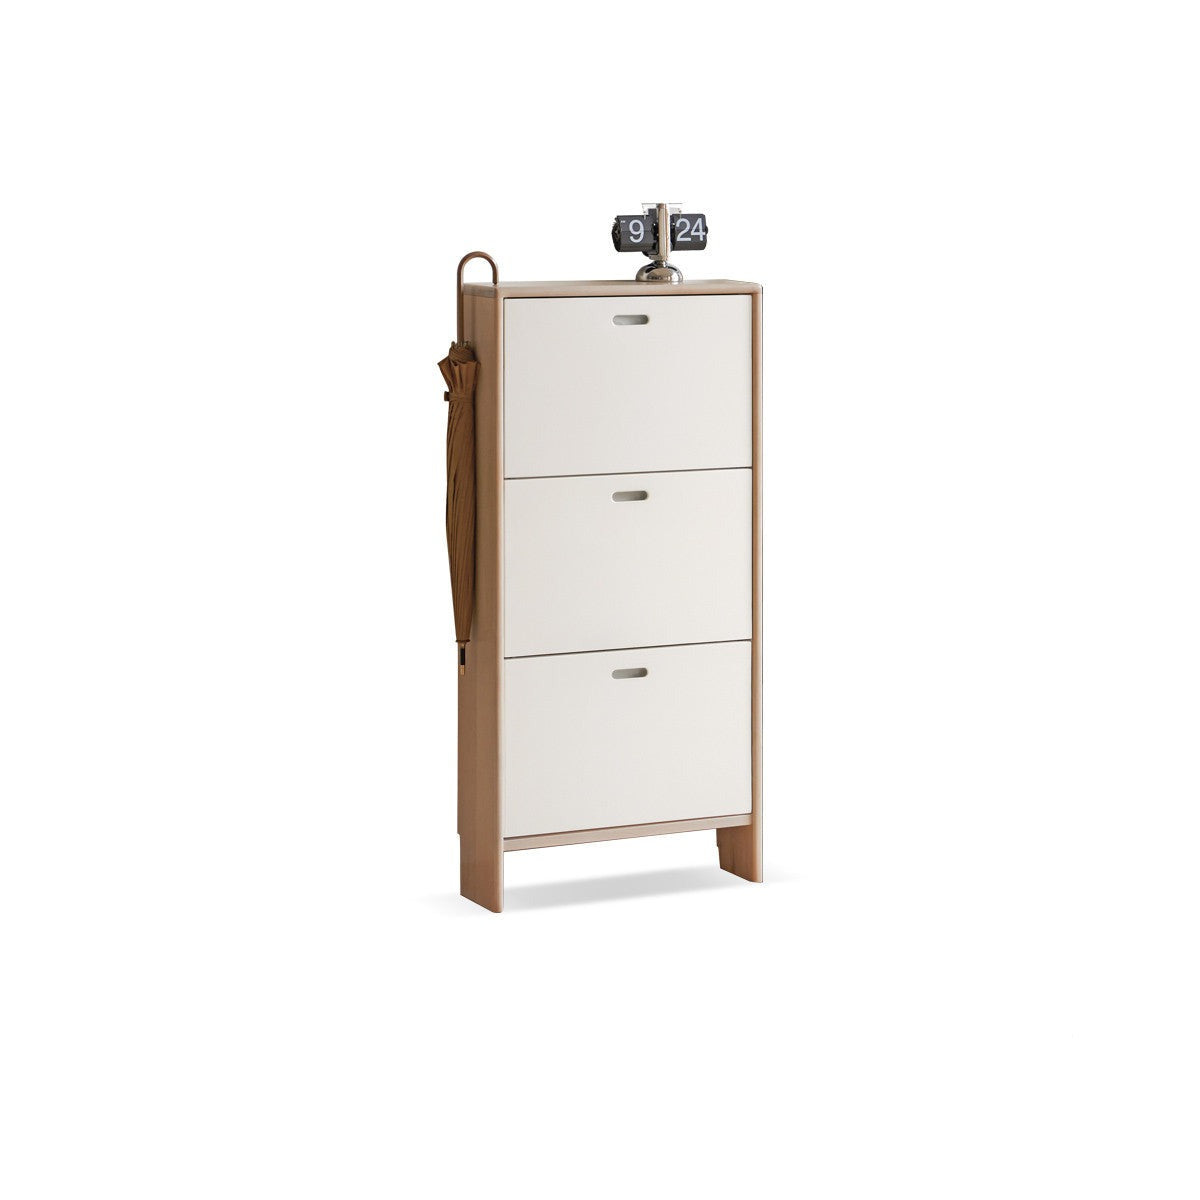 Birch solid wood ultra-thin shoe cabinet-